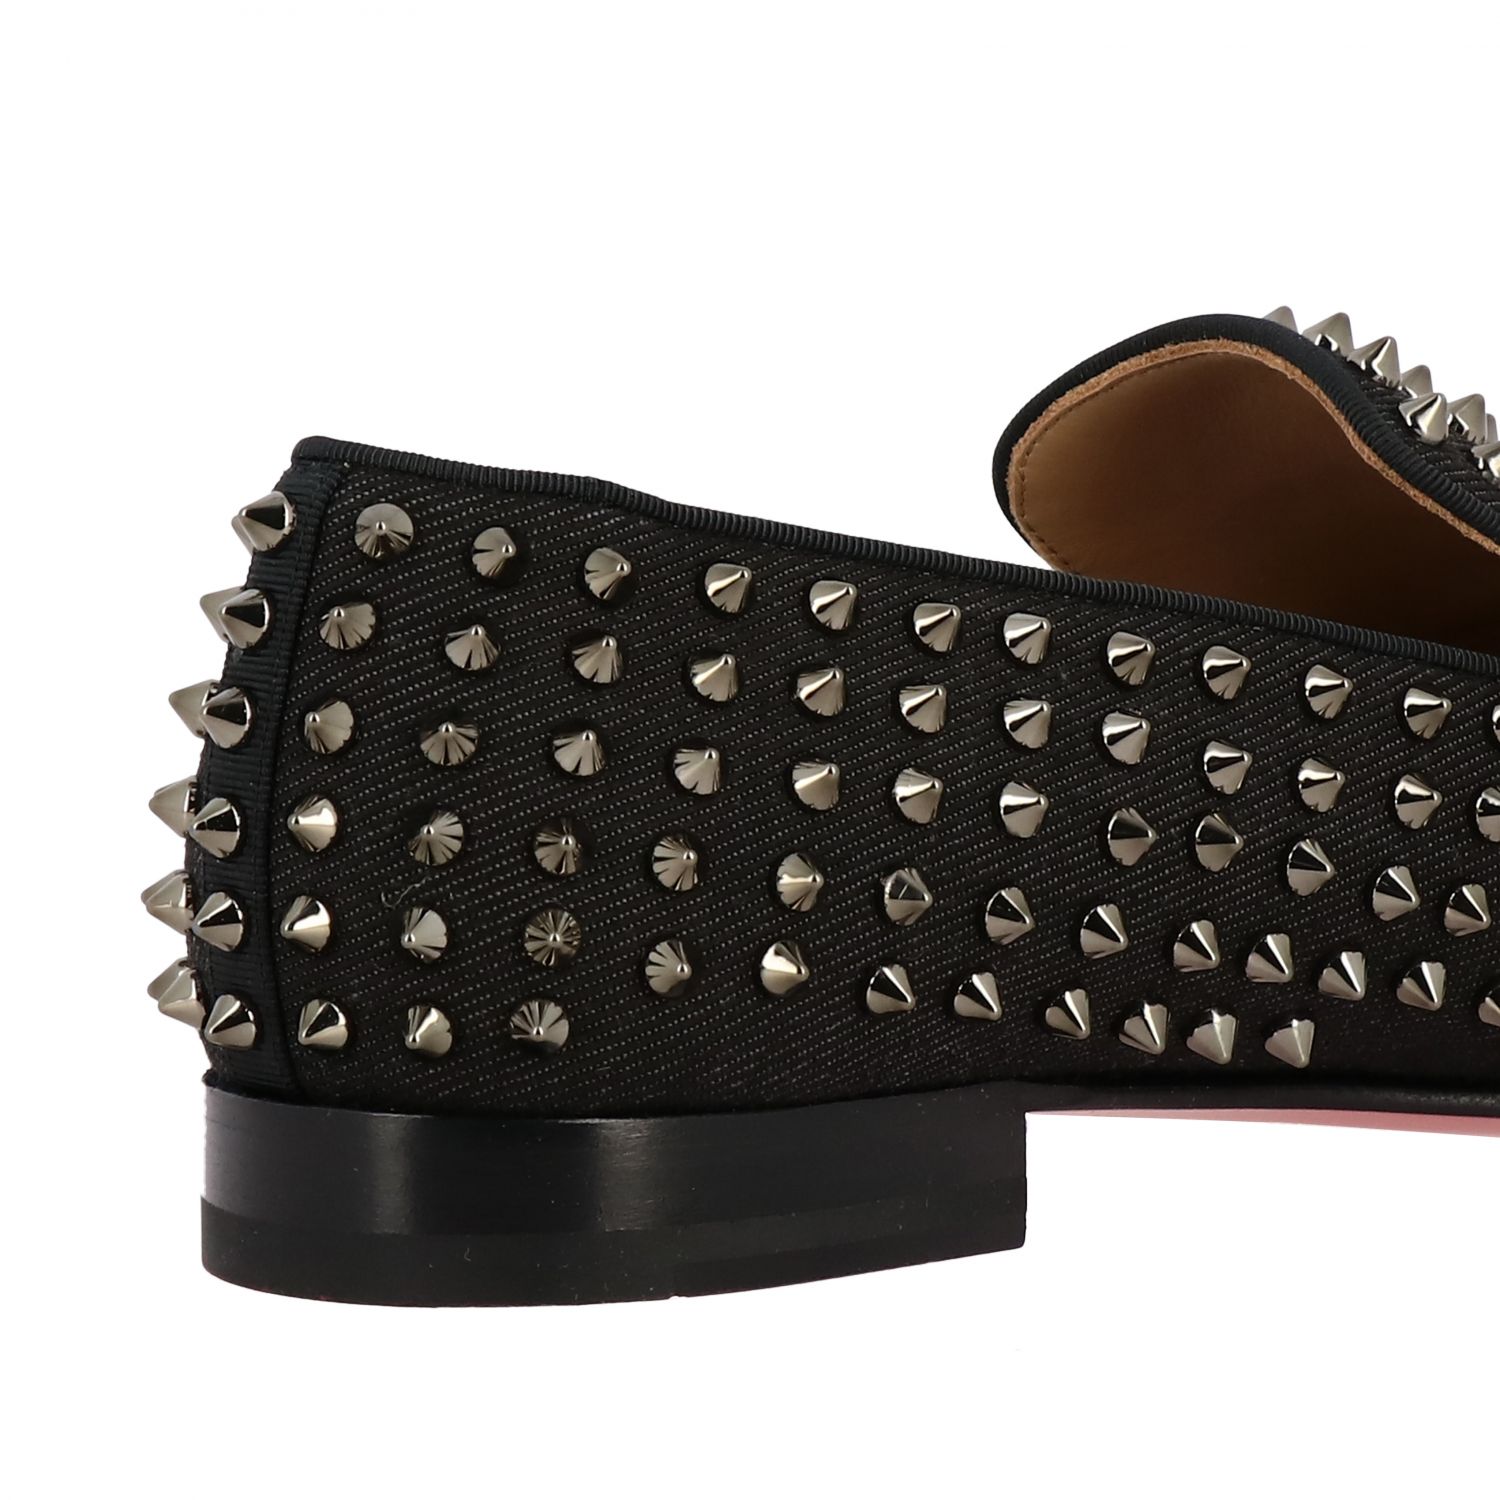 Rollerboy Spikes Christian Louboutin flat moccasin in denim with studs